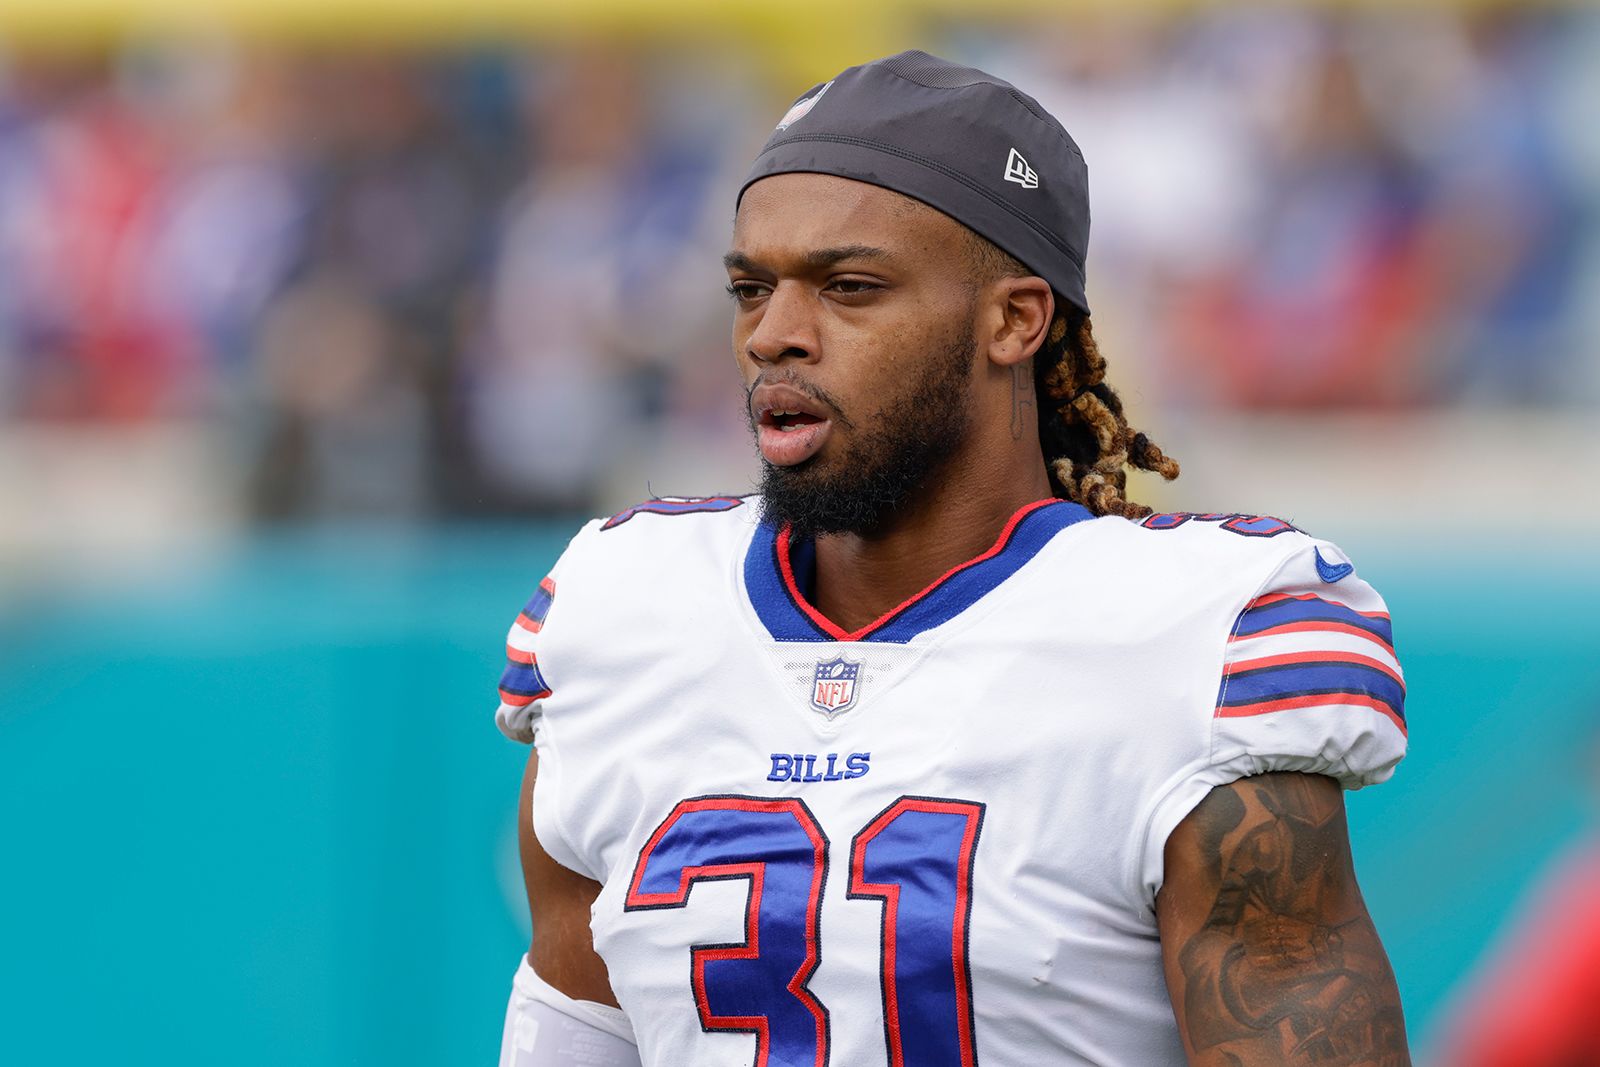 Damar Hamlin update: Bills safety's breathing tube is out and he told team,  'Love you boys,' via video, Buffalo Bills say